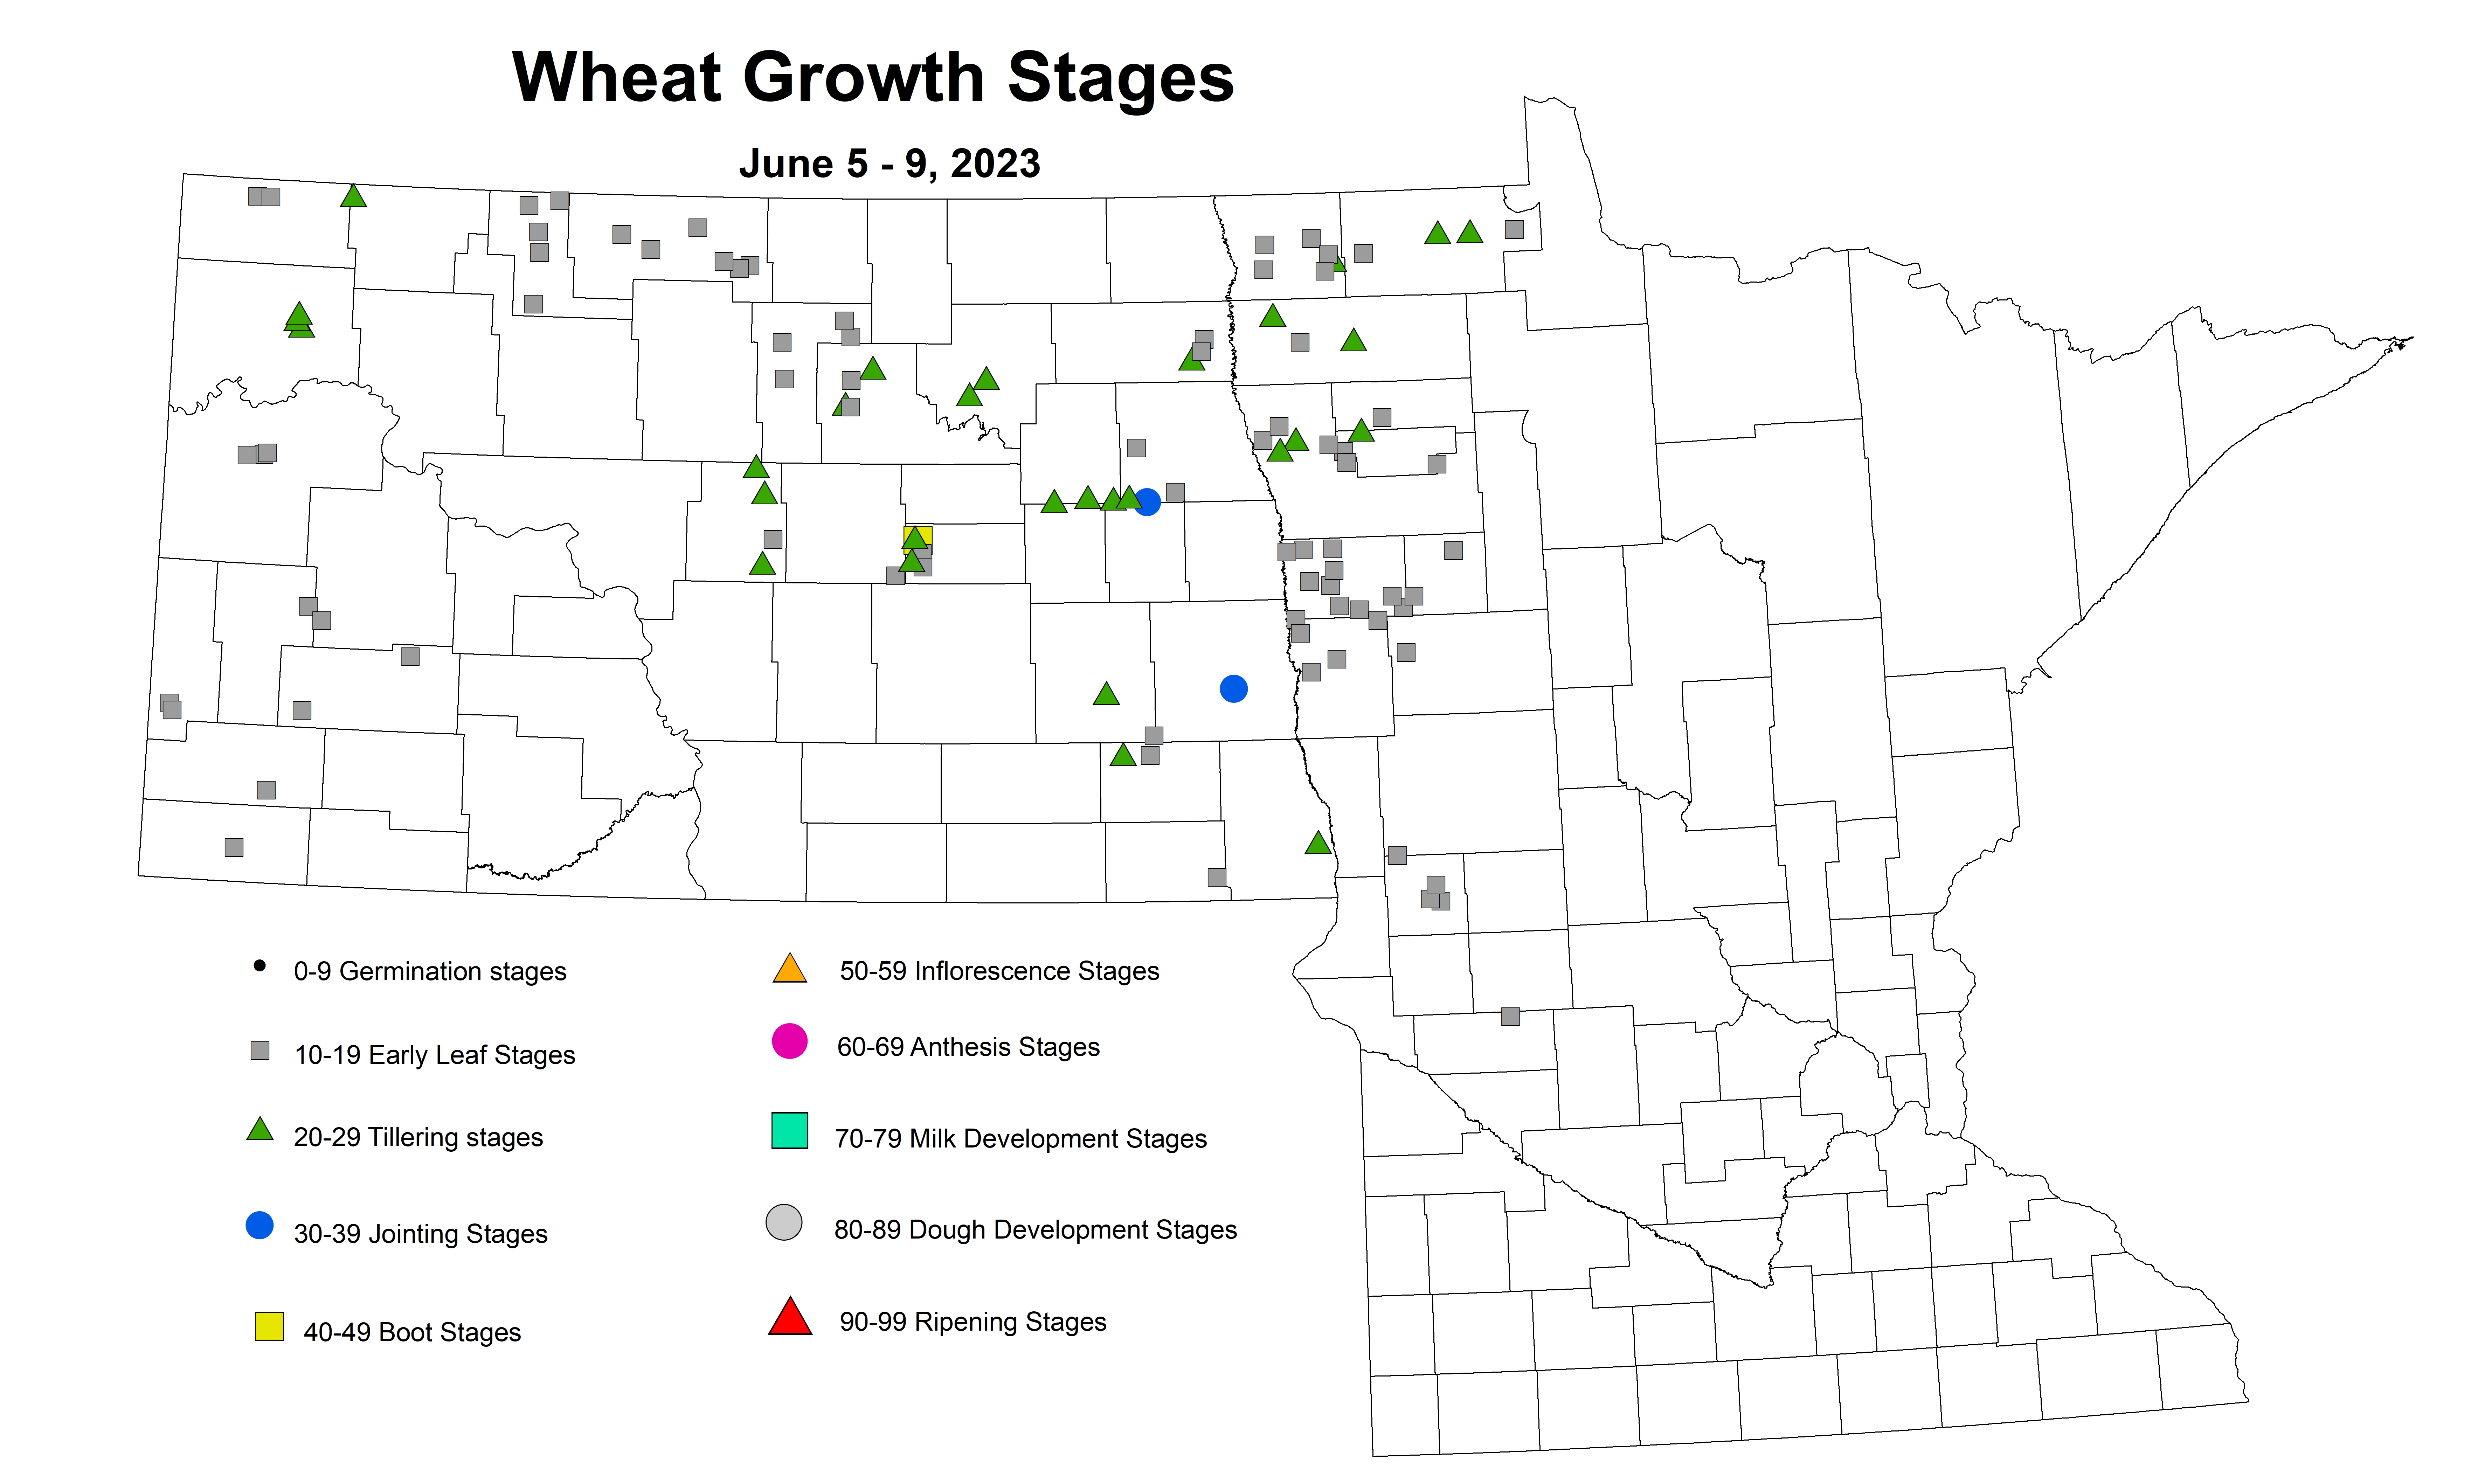 wheat growth stages June 5-9 2023